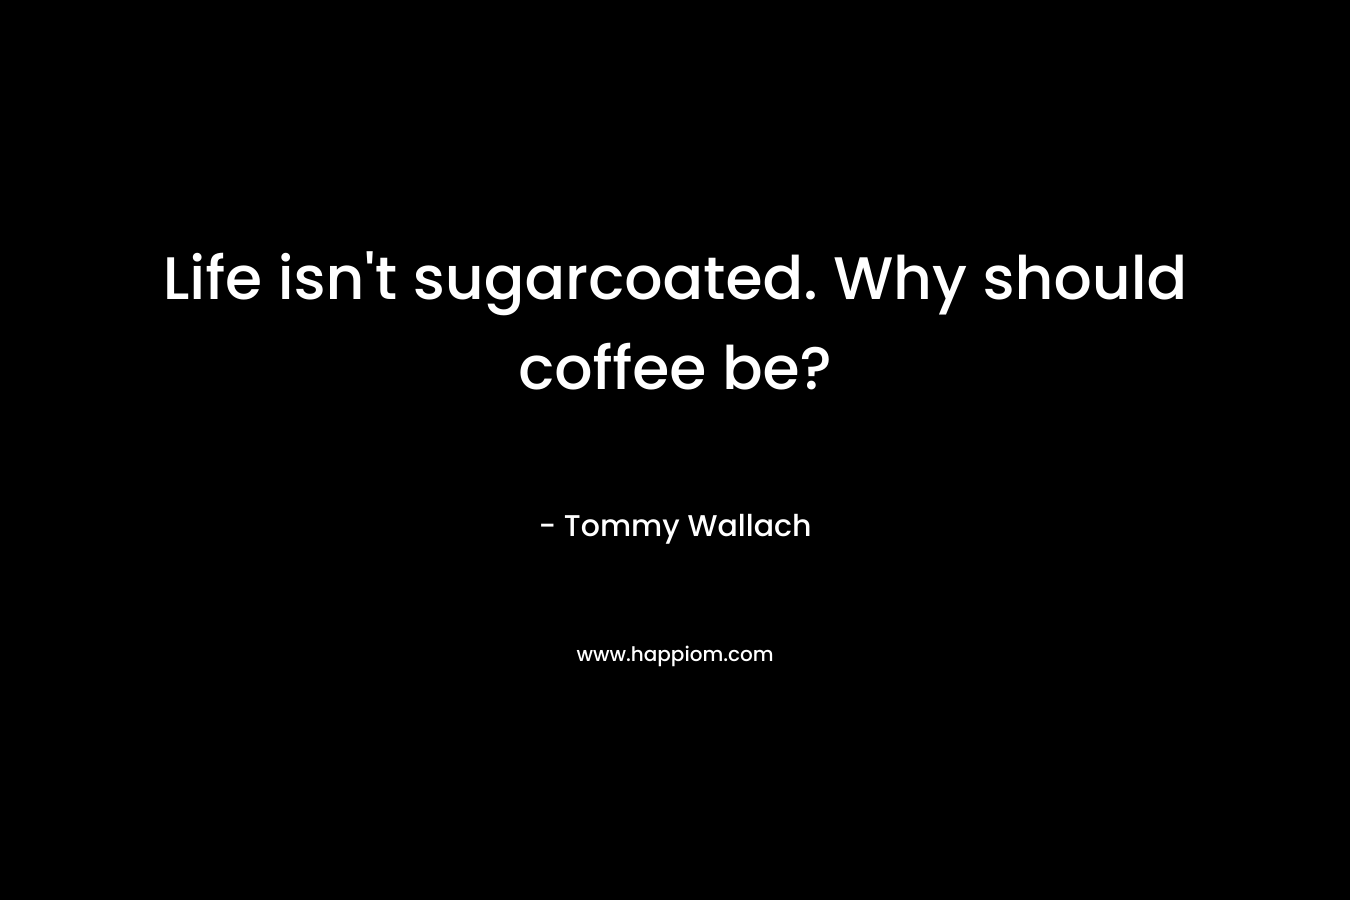 Life isn’t sugarcoated. Why should coffee be? – Tommy Wallach